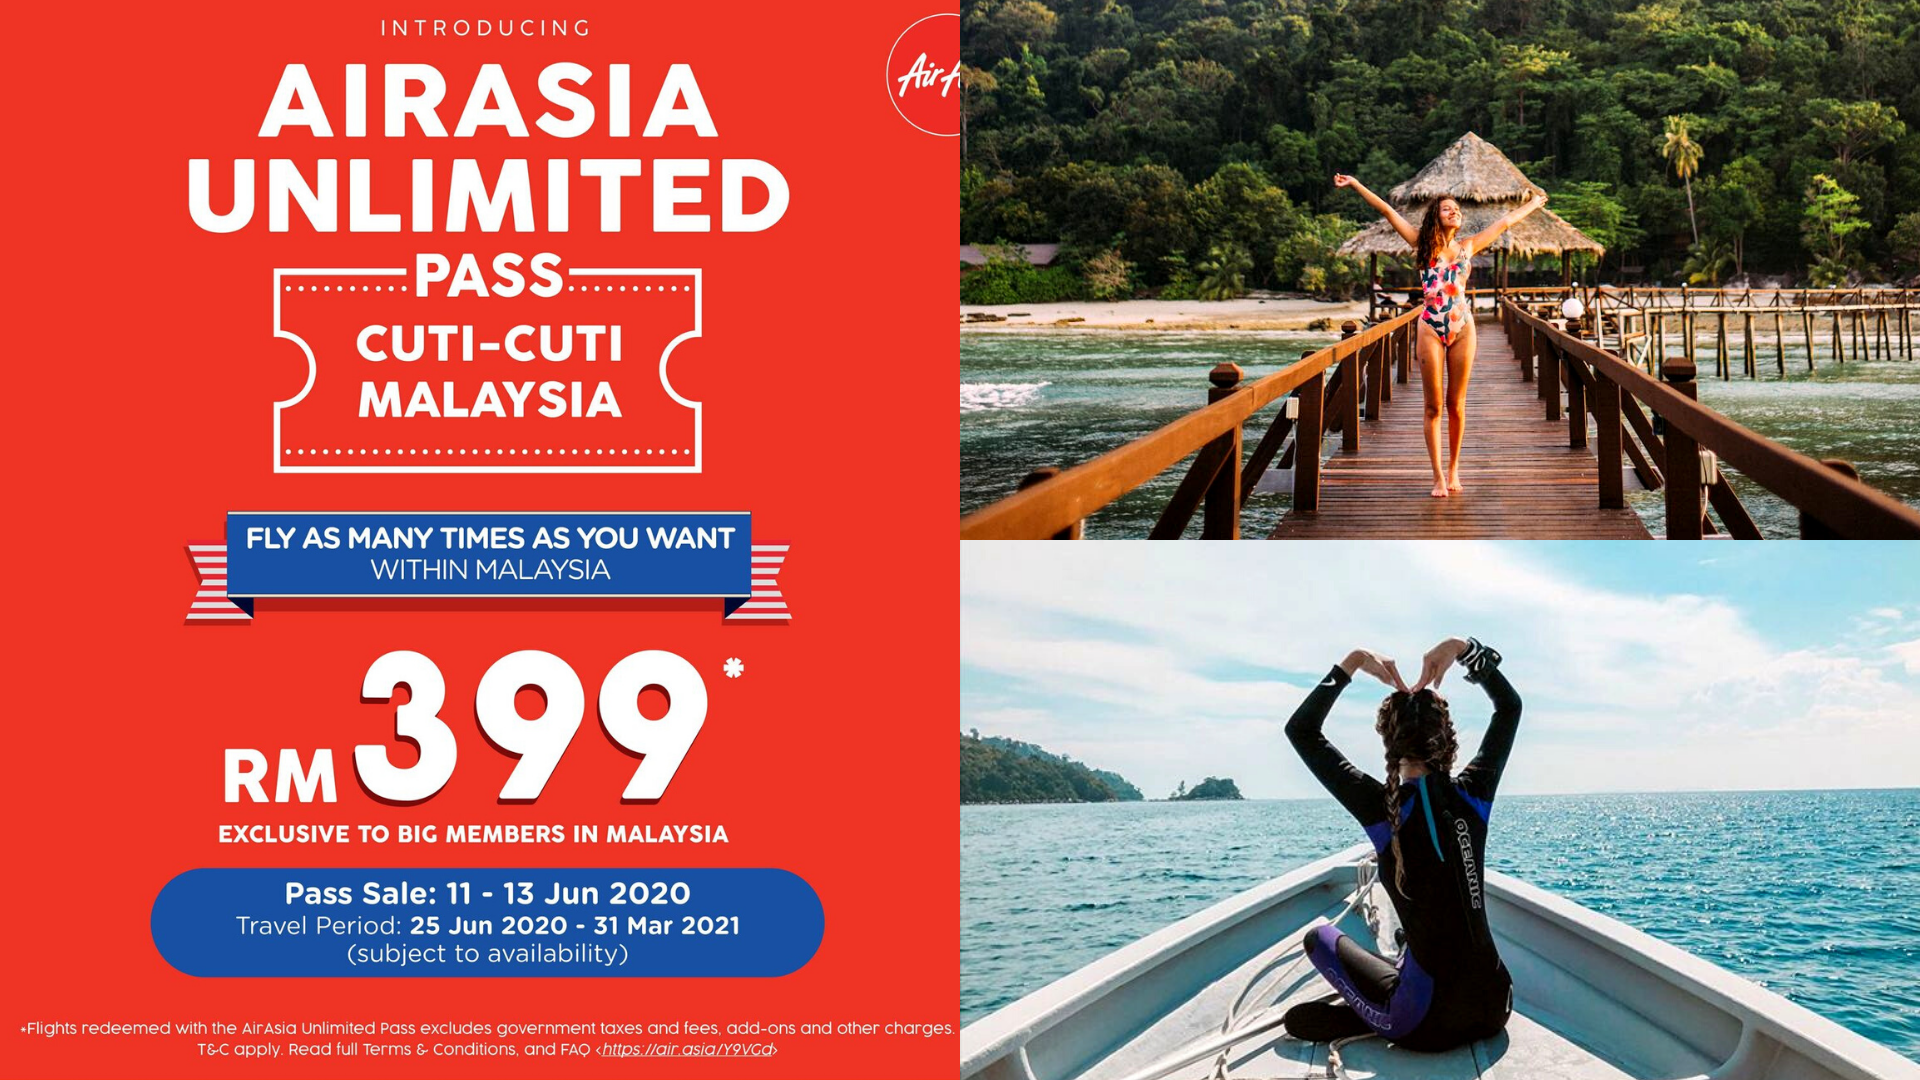 Fly As Many Times As You Want For Only Rm399 With Airasia S New Unlimited Pass Time To Plan Some Cuti Cuti Malaysia Adventures Klook Travel Blog